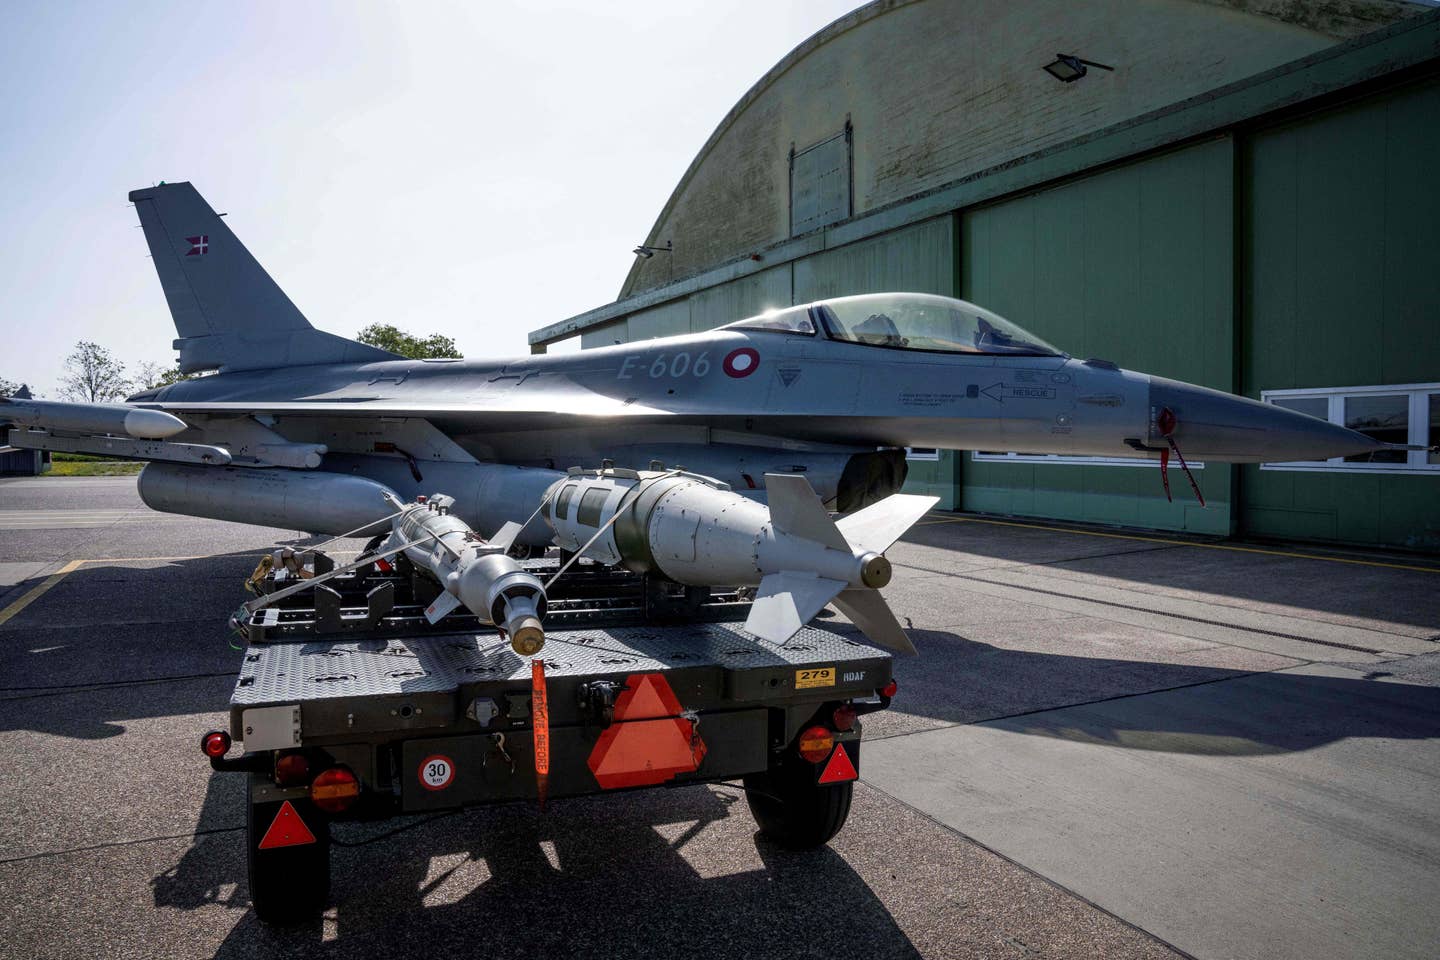 A Paveway series bomb and a JDAM in front of a Danish F-16 at Skrydstrup Air Base in Denmark on May 25, 2023. <em>Photo by BO AMSTRUP/Ritzau Scanpix/AFP via Getty Images</em>